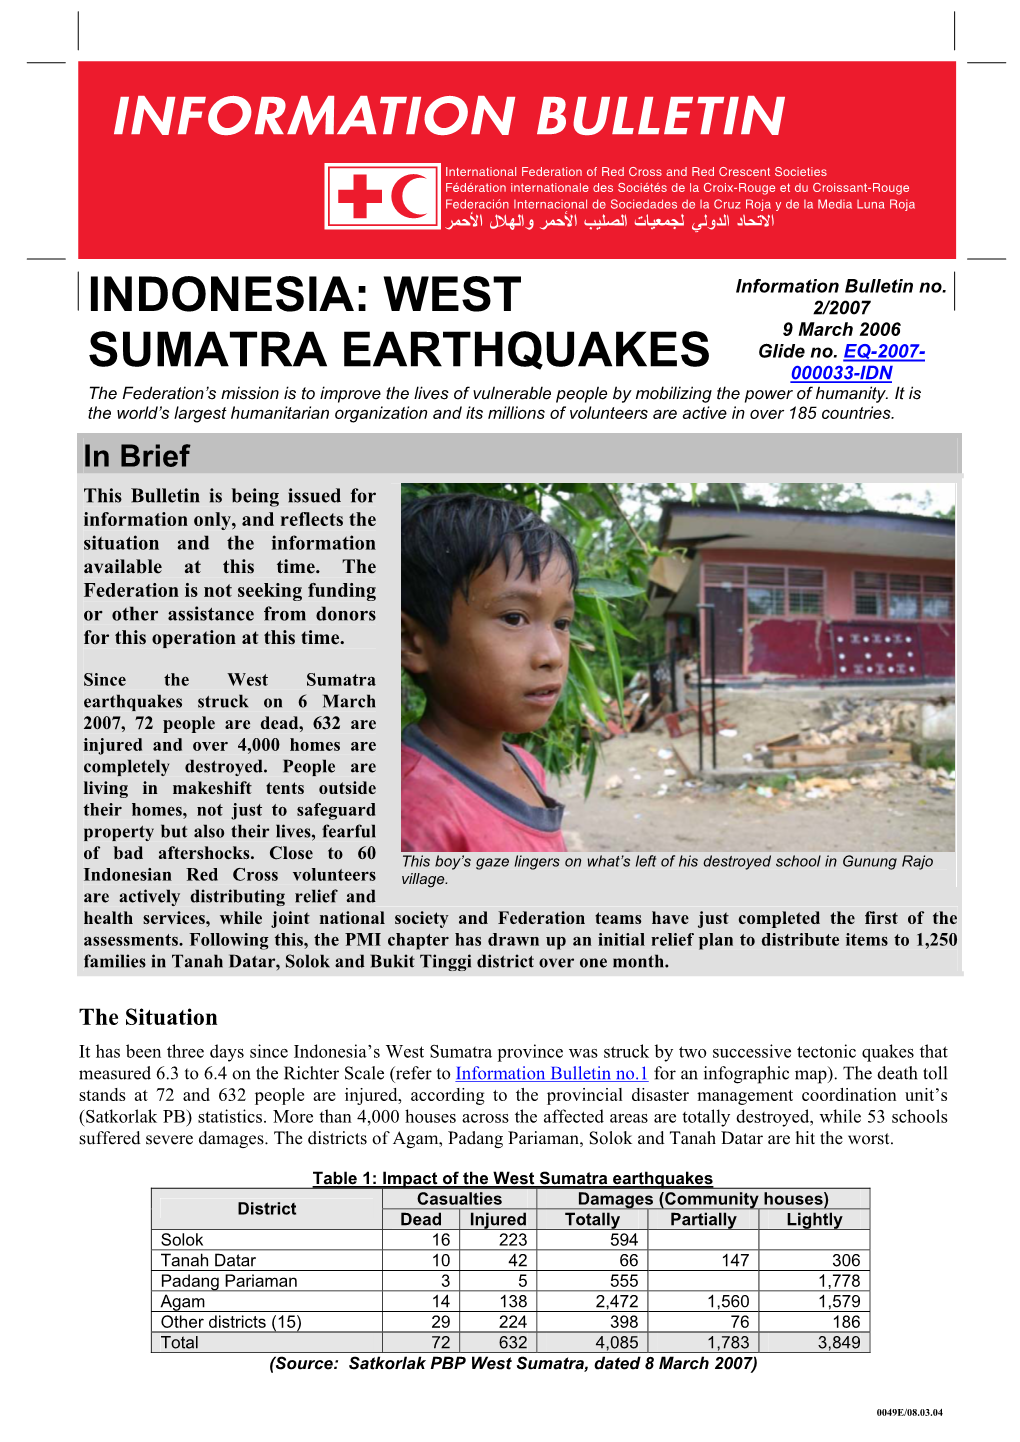 West Sumatra Earthquakes Struck on 6 March 2007, 72 People Are Dead, 632 Are Injured and Over 4,000 Homes Are Completely Destroyed